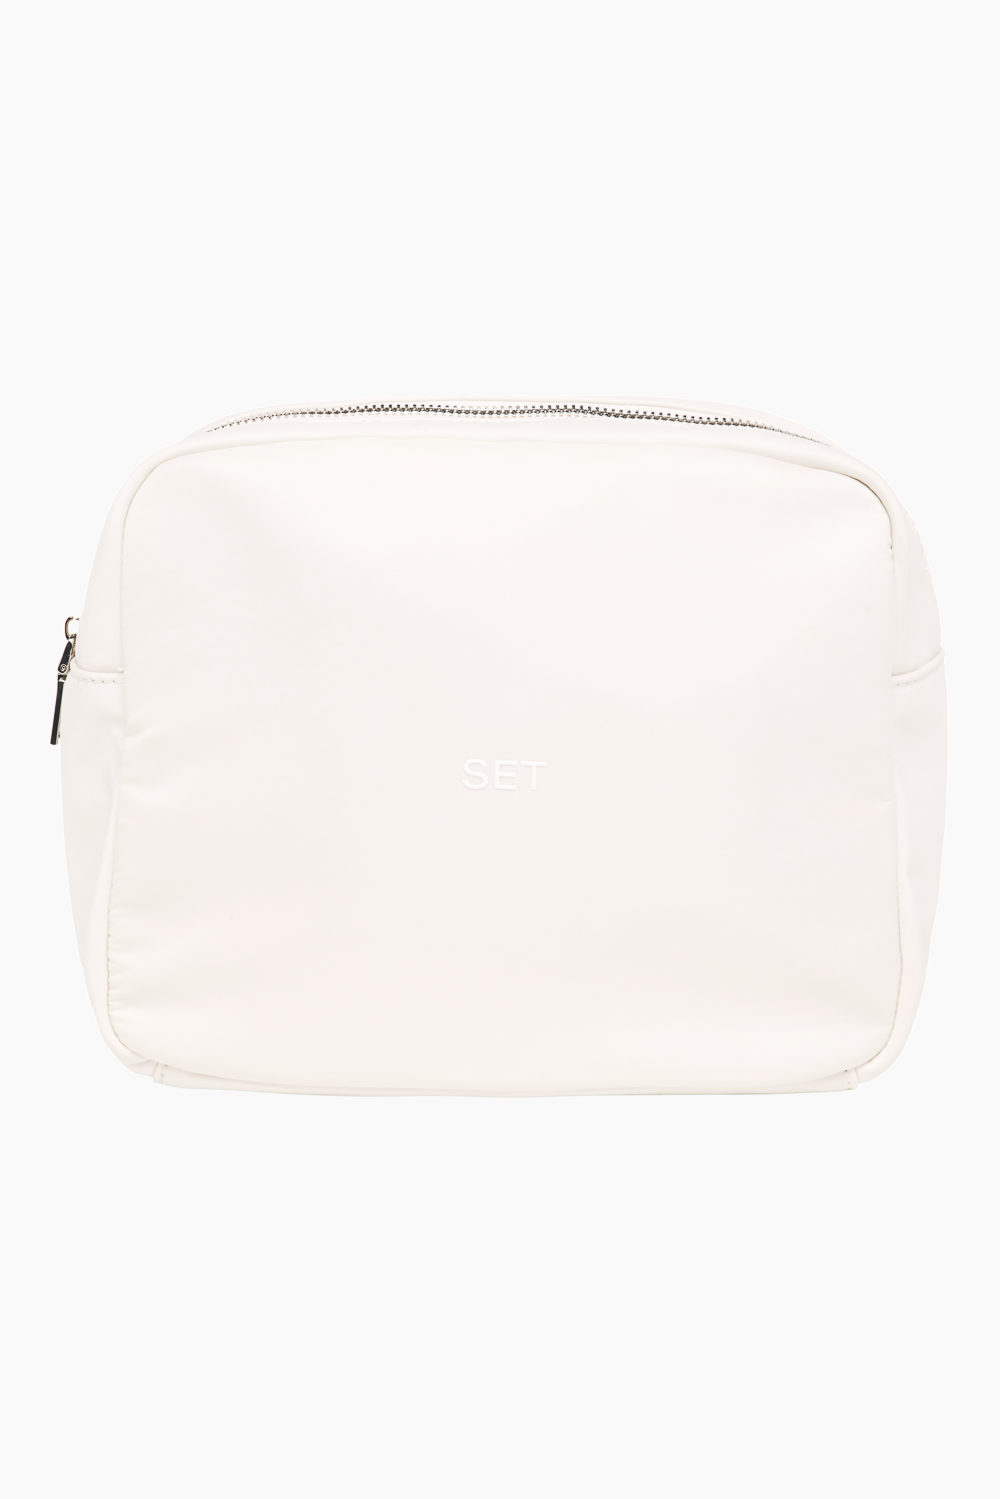 EVERYTHING BAG - BLANC Featured Image